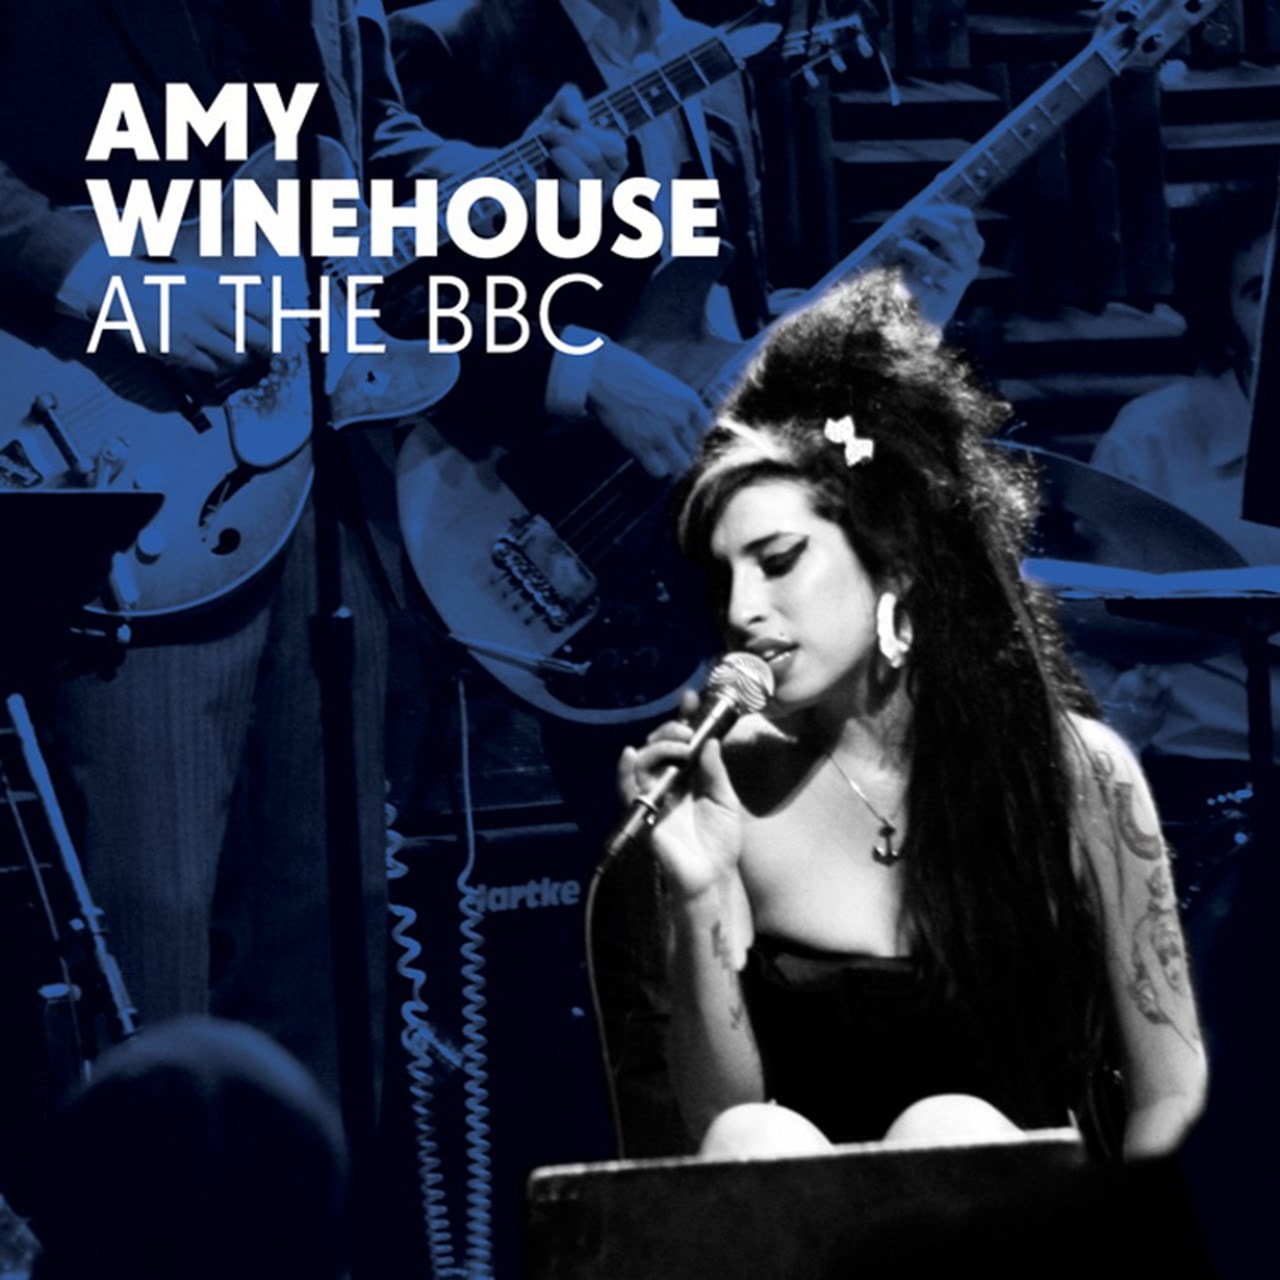 Amy Winehouse At The Bbc Cddvd Album Free Shipping Over £20 Hmv Store 